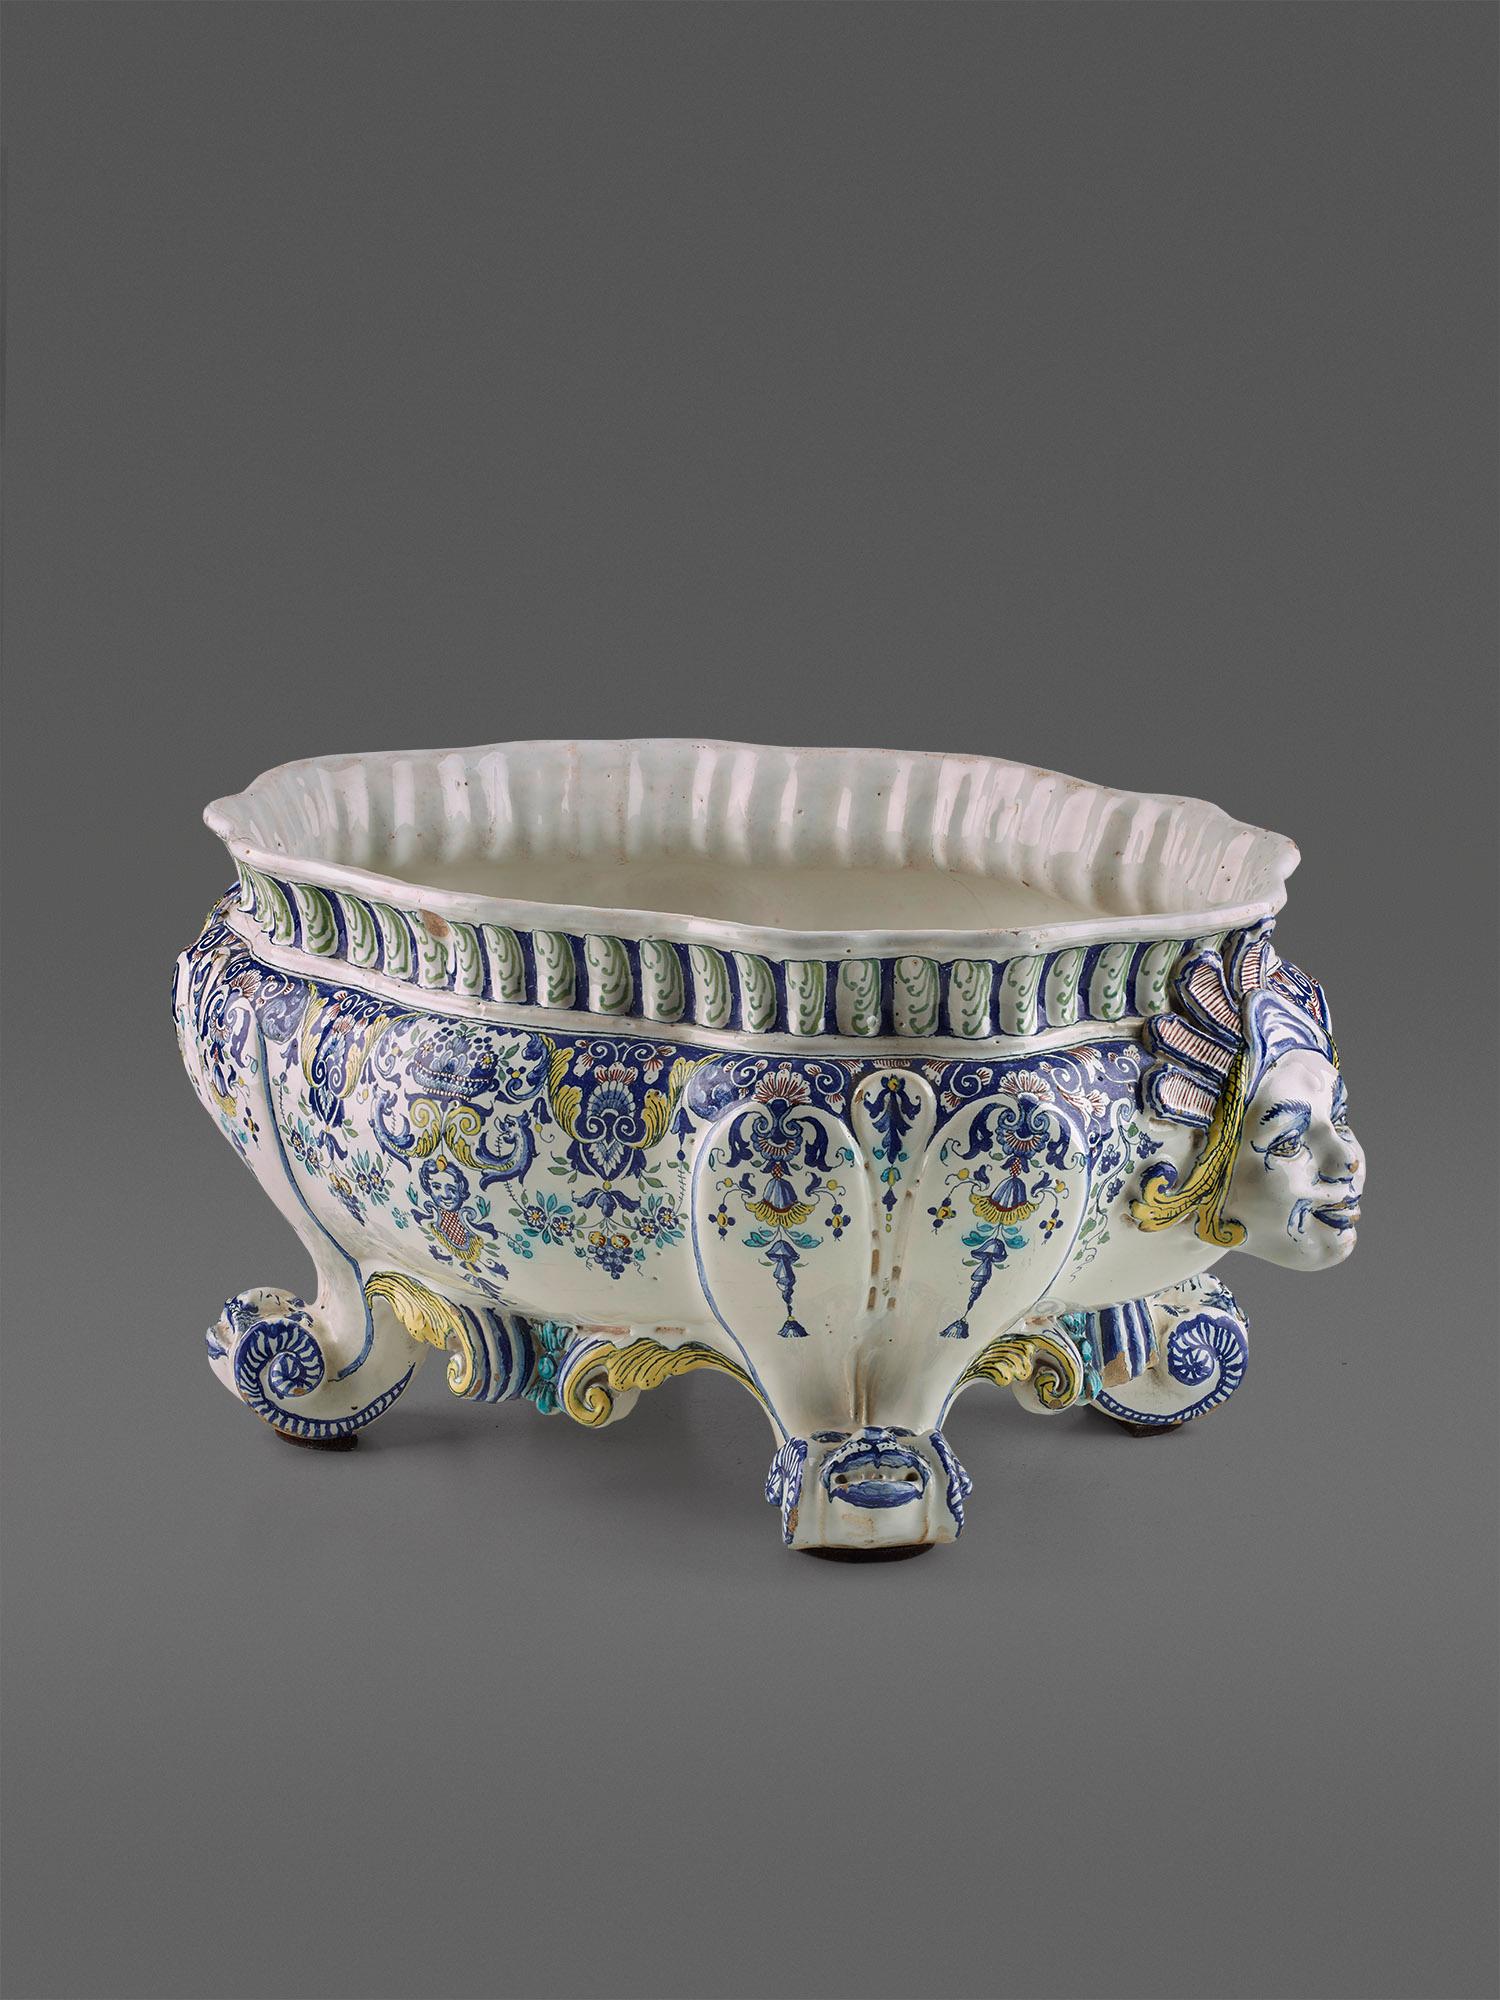 Faience, white glaze with sharp fire decoration in yellow, green and blue tones in delicate gradations. Flared volute feet with dolphins support the oval
support the oval, passively curved planter with fully sculptured female busts as decorative